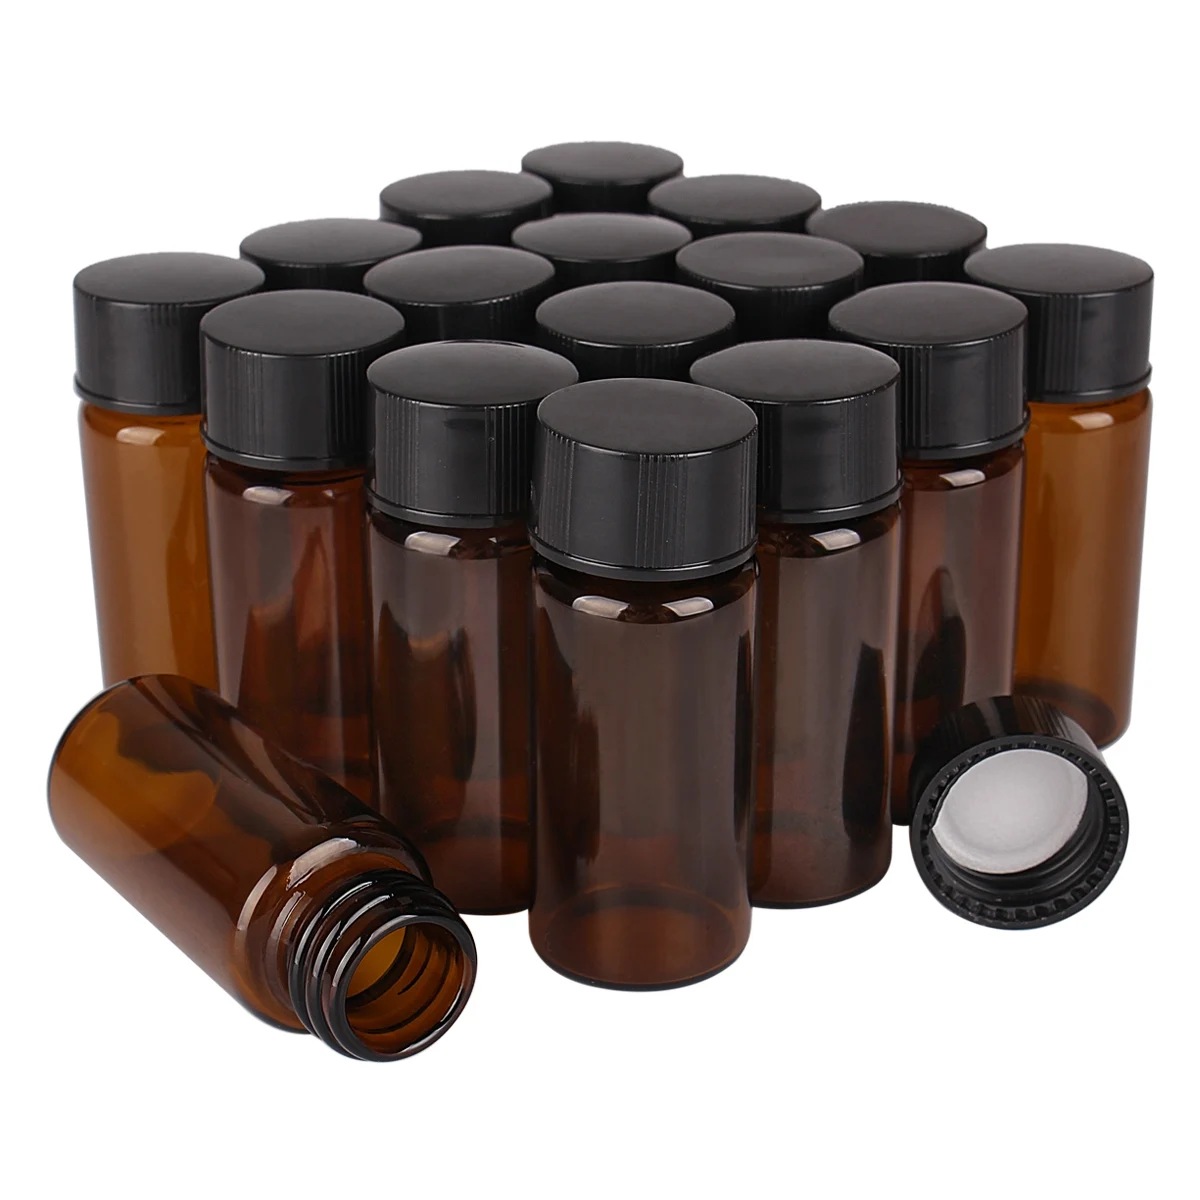 

50 Pieces 10ml 22*50mm Small Amber Glass Bottles Ink Perfume Bottles Jars Vials with Black Plastic Caps for Craft Accessory DIY